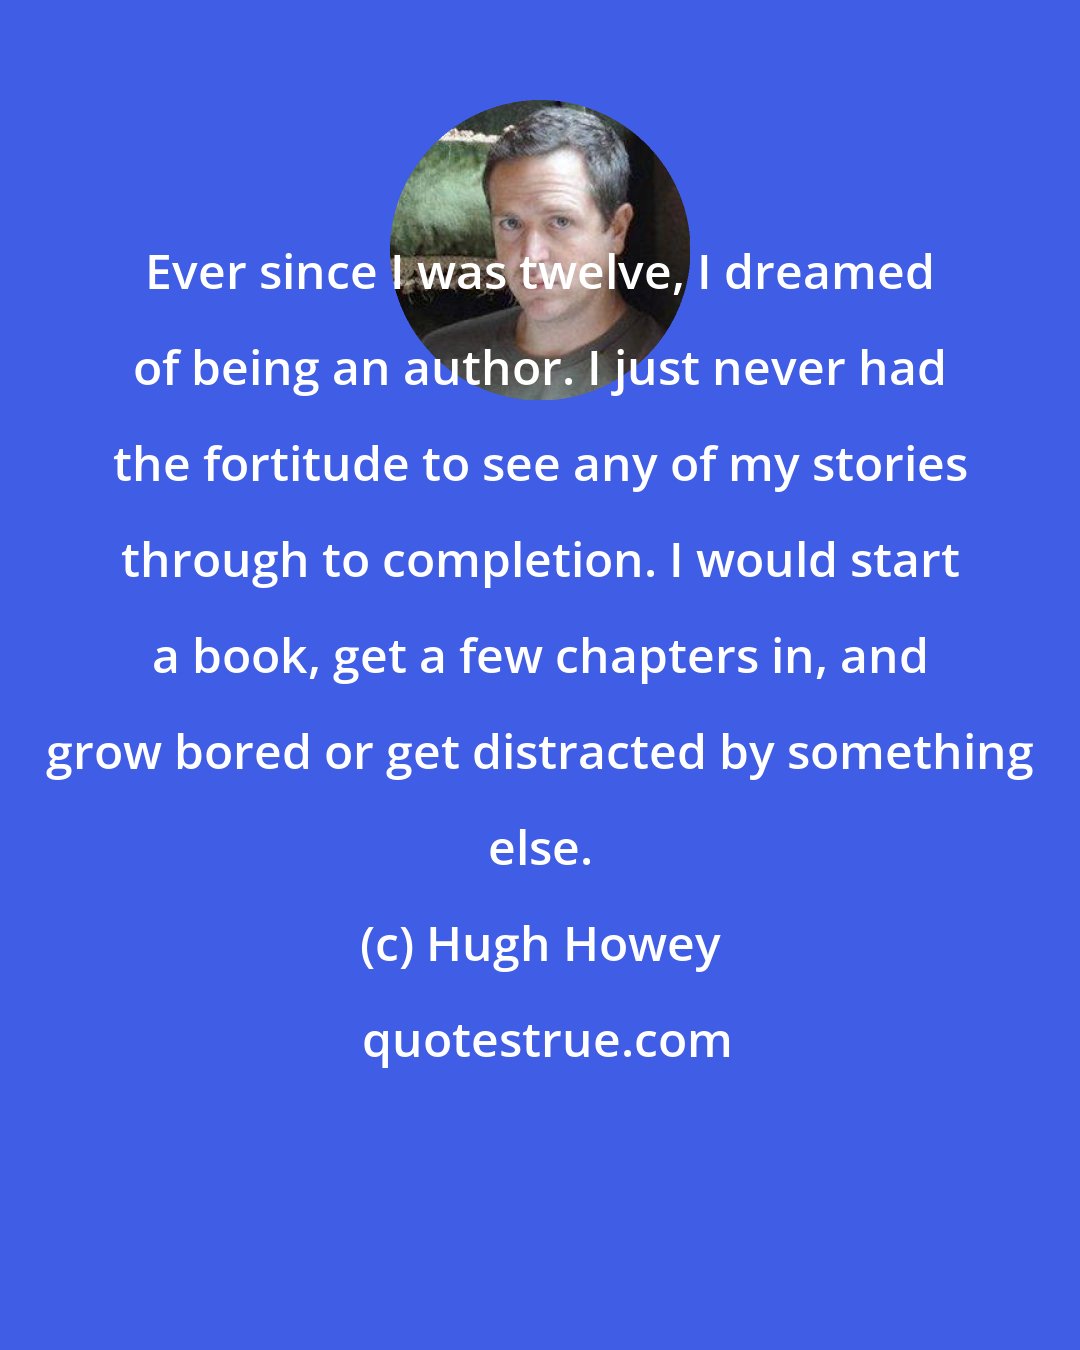 Hugh Howey: Ever since I was twelve, I dreamed of being an author. I just never had the fortitude to see any of my stories through to completion. I would start a book, get a few chapters in, and grow bored or get distracted by something else.